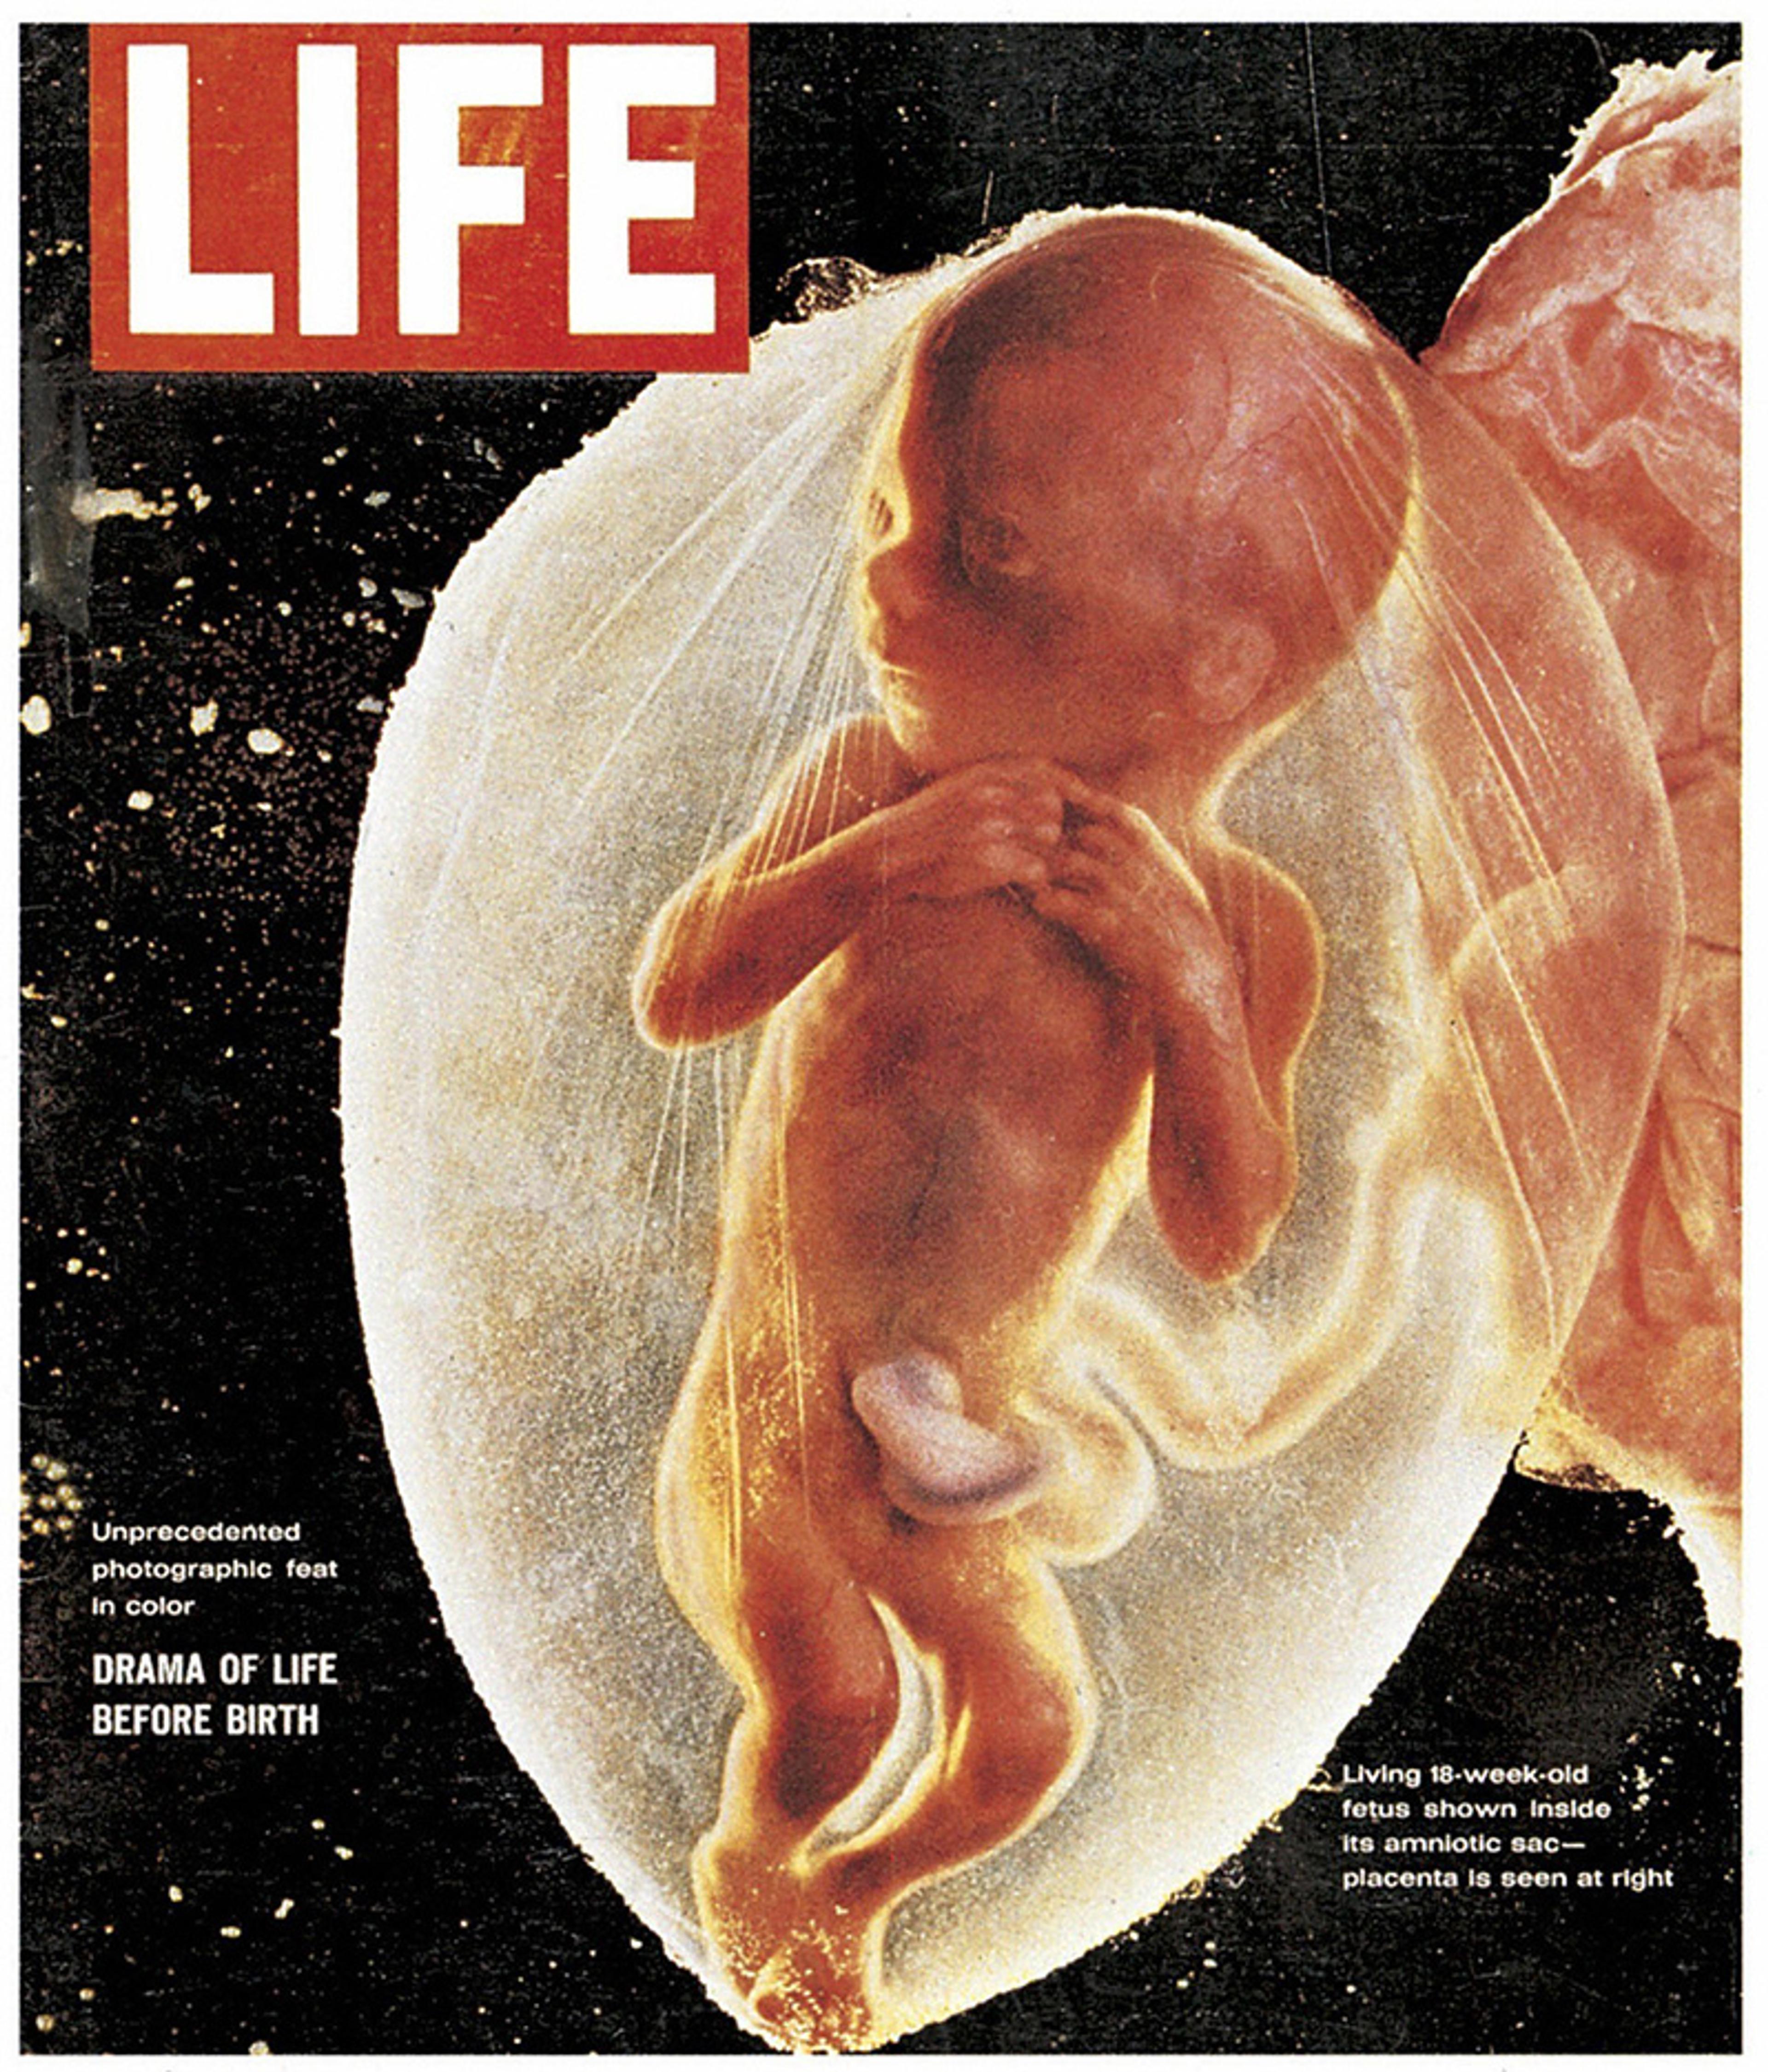 Cover of LIFE magazine showing an 18-week-old fetus in its amniotic sac. The image highlights the drama of life before birth, capturing this unprecedented photographic feat in colour. The text mentions “Unprecedented photographic feat in color” and “DRAMA OF LIFE BEFORE BIRTH.”